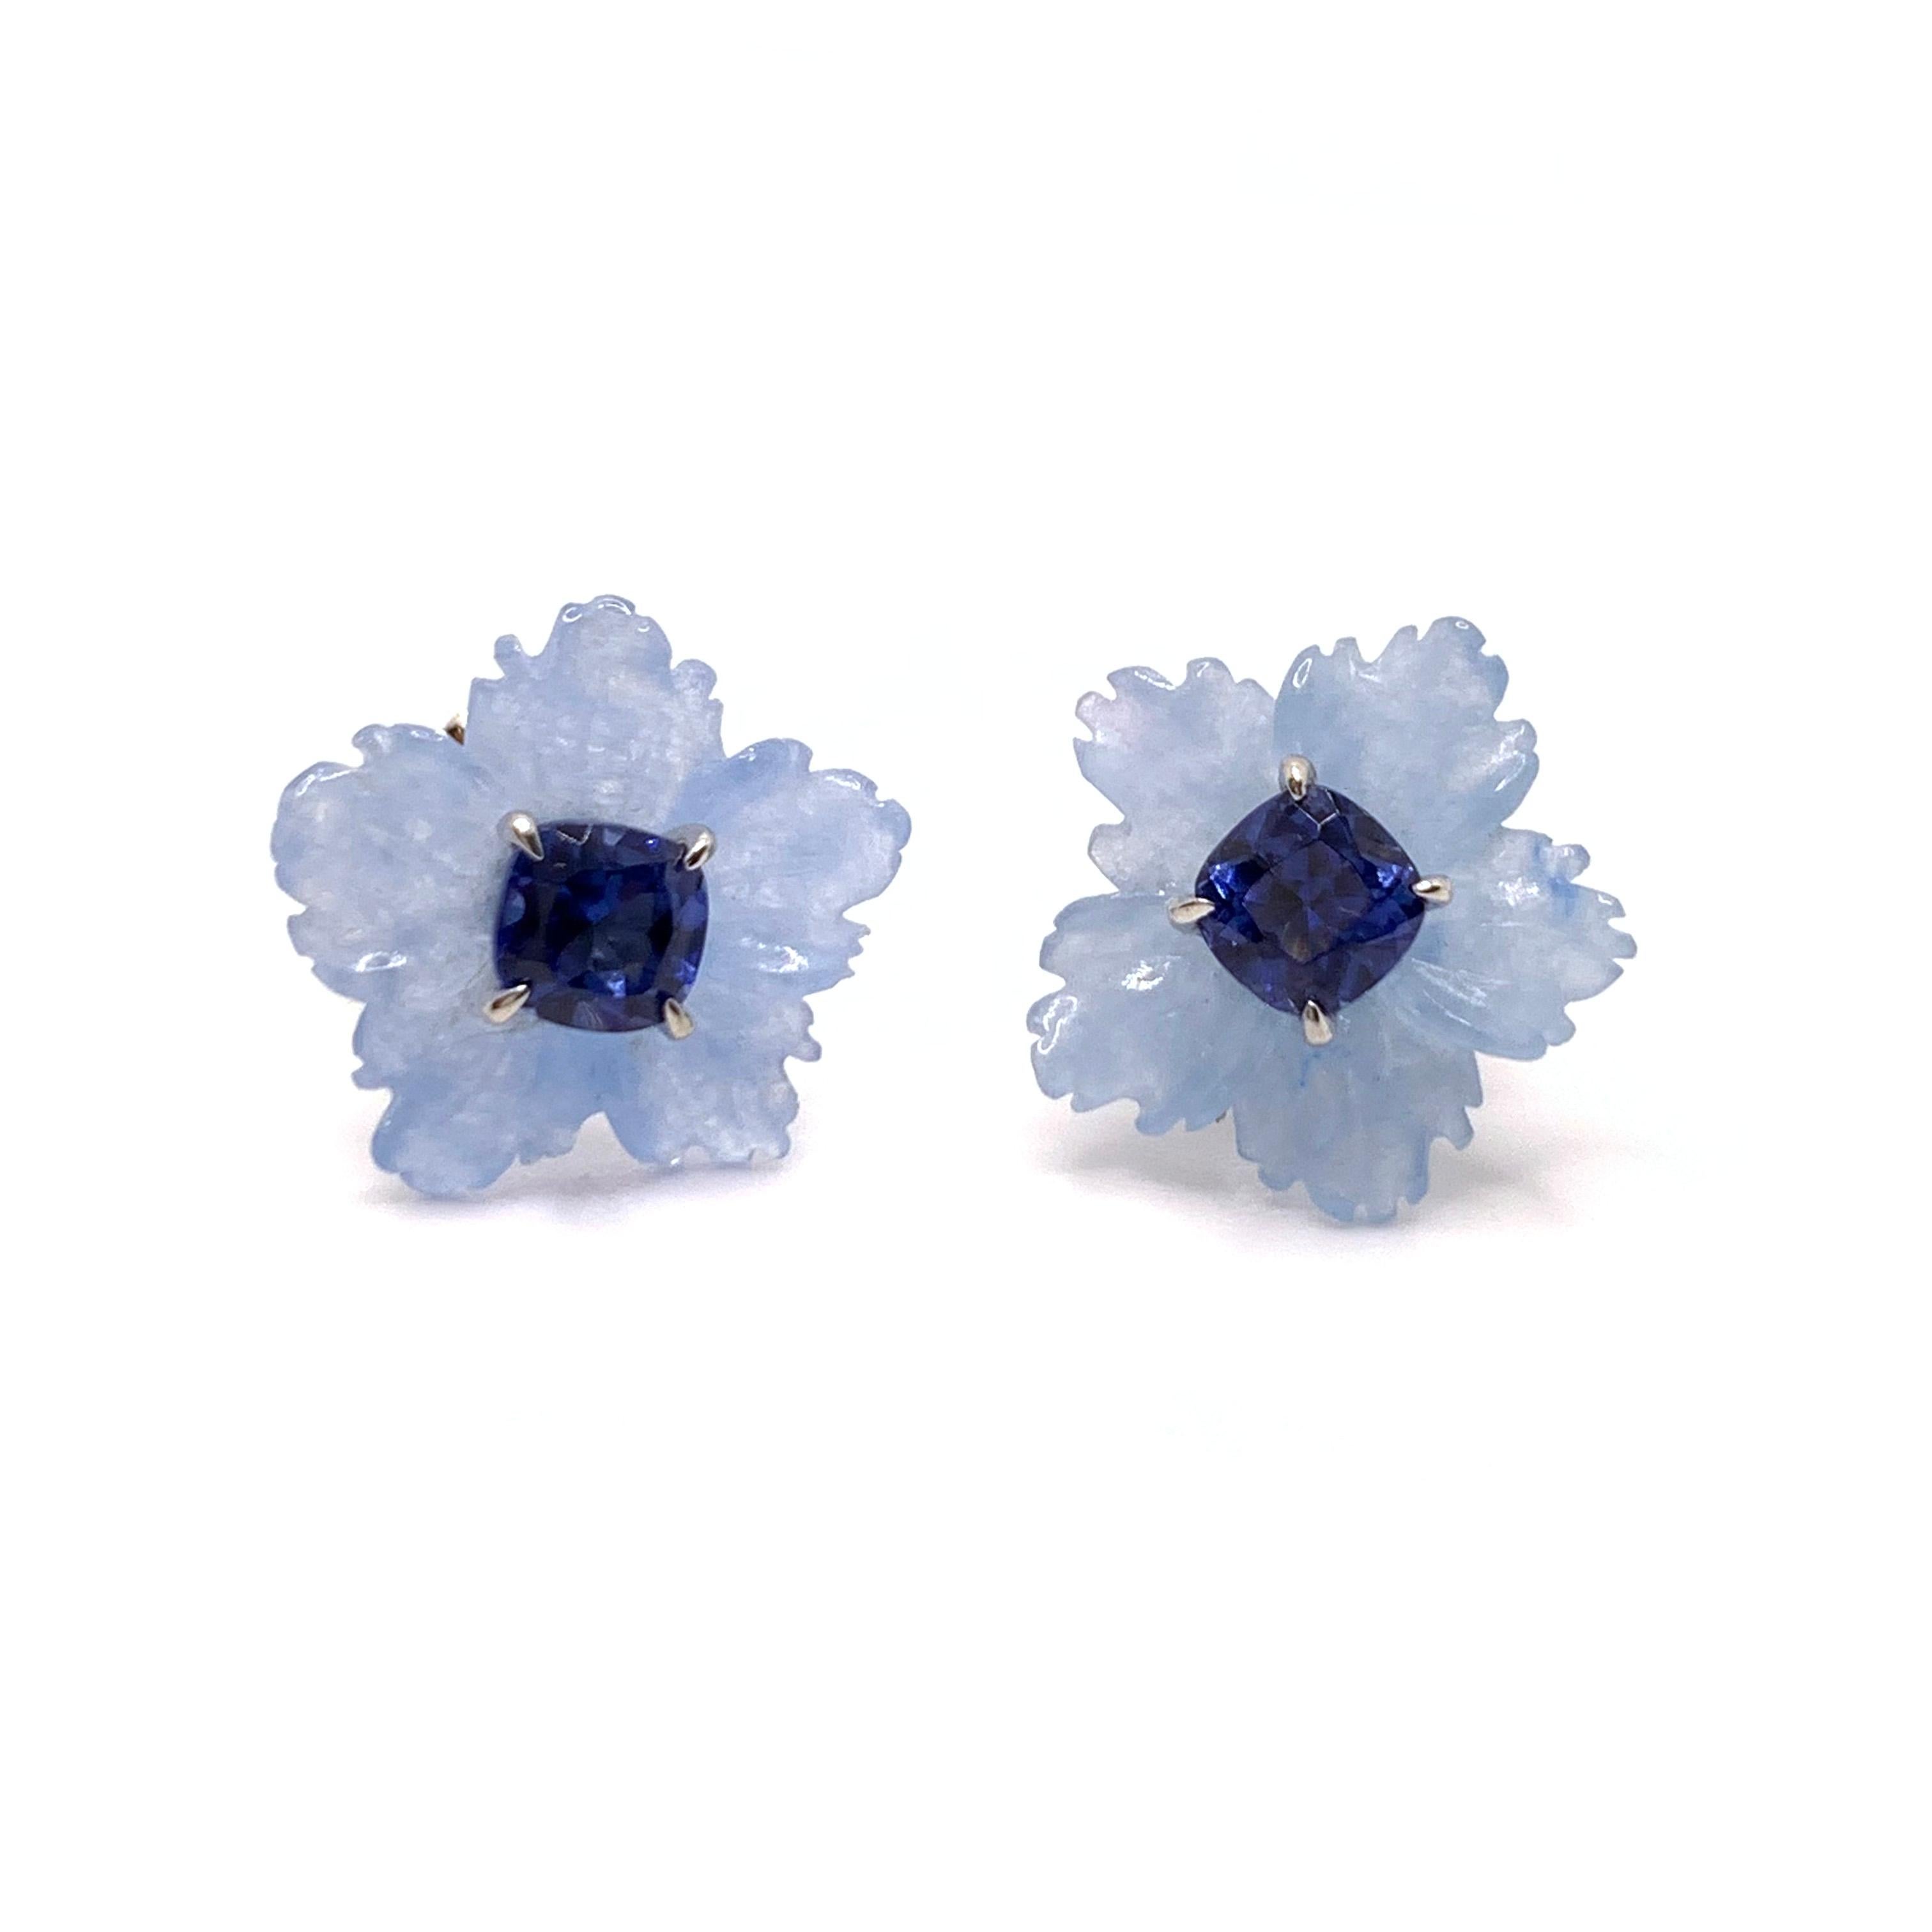 Bijoux Num's 15mm Carved Blue Quartzite Flower and Cushion Lab Sapphire Sterling Silver Earrings

This gorgeous pair of earrings features 15mm blue quartzite carved into beautiful three dimension flower, adorned with cushion-cut lab-created sapphire